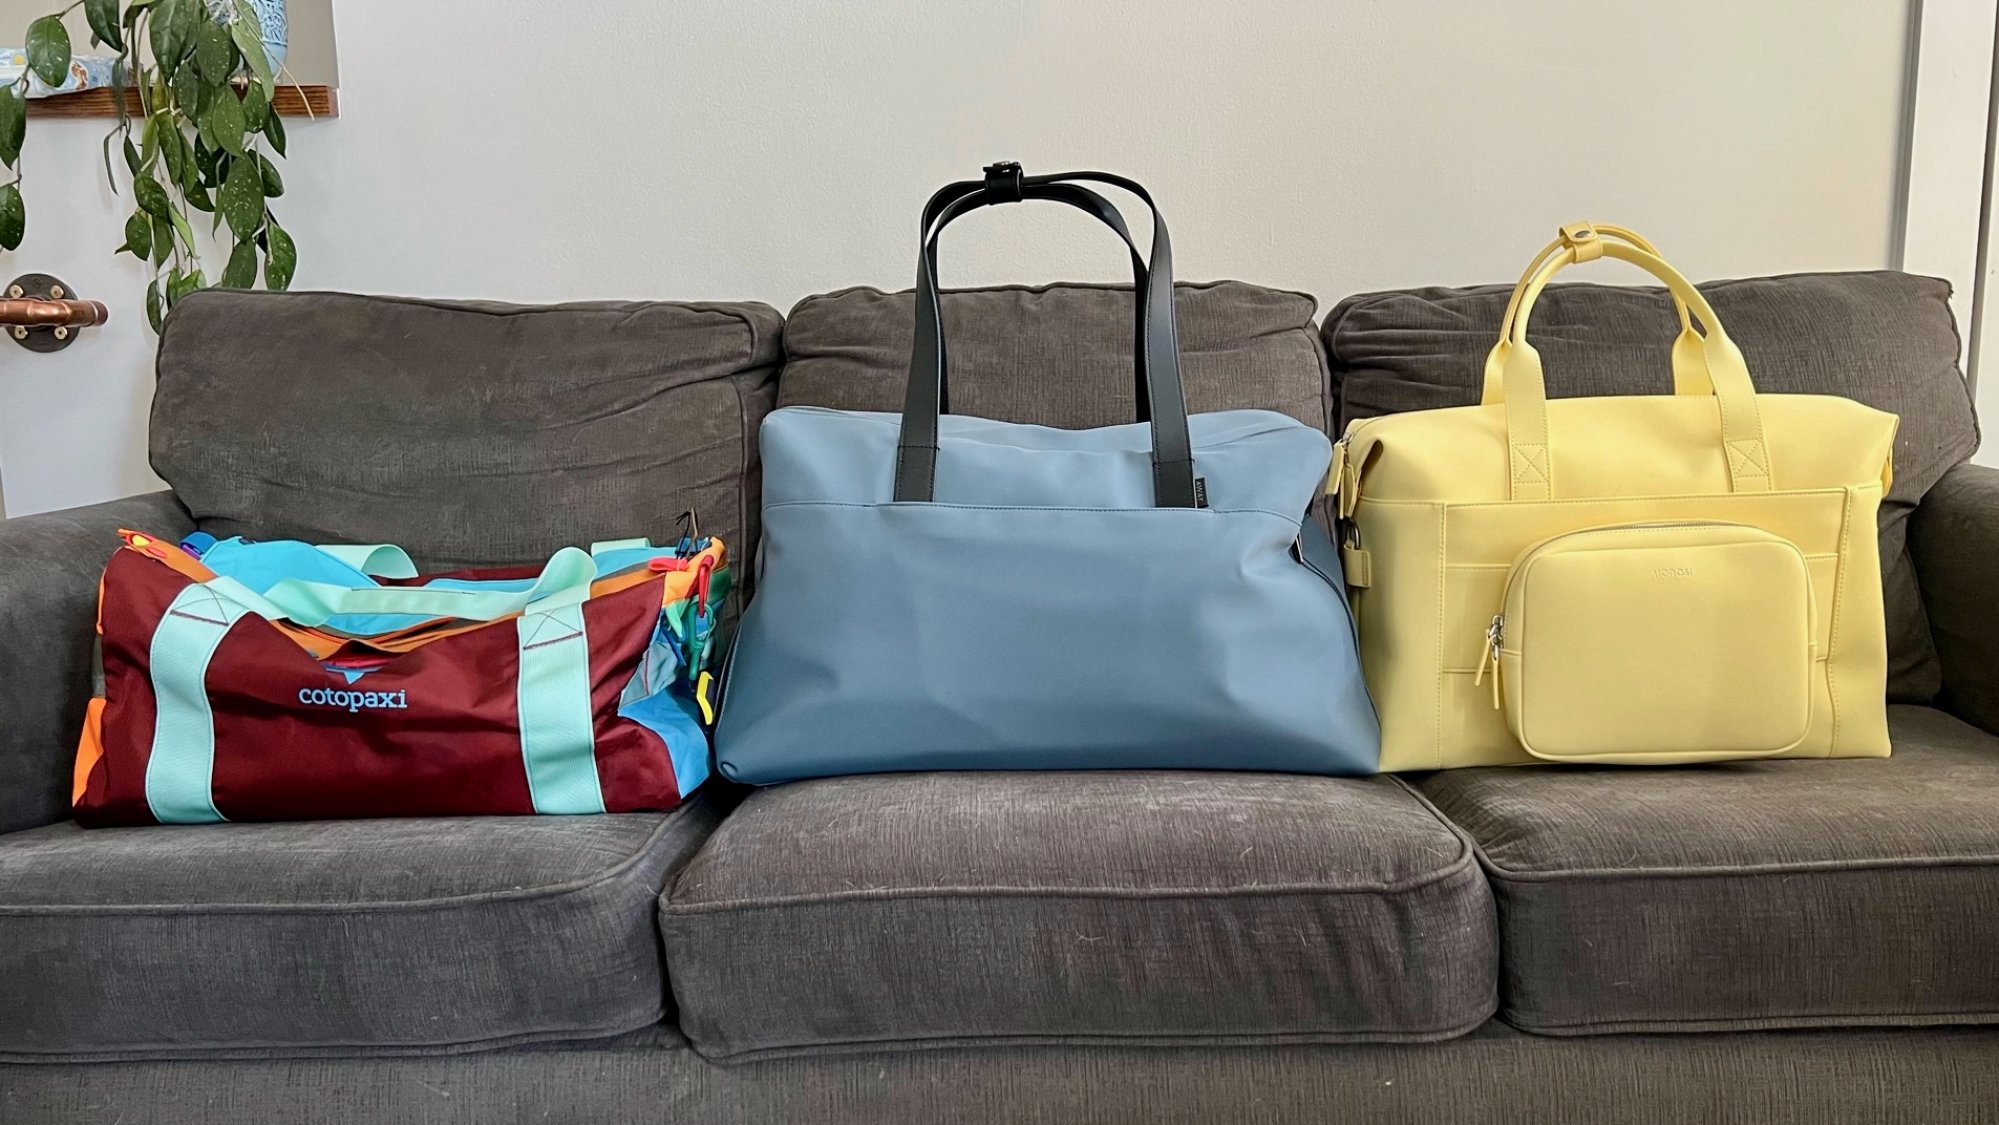 three duffel bags on a couch